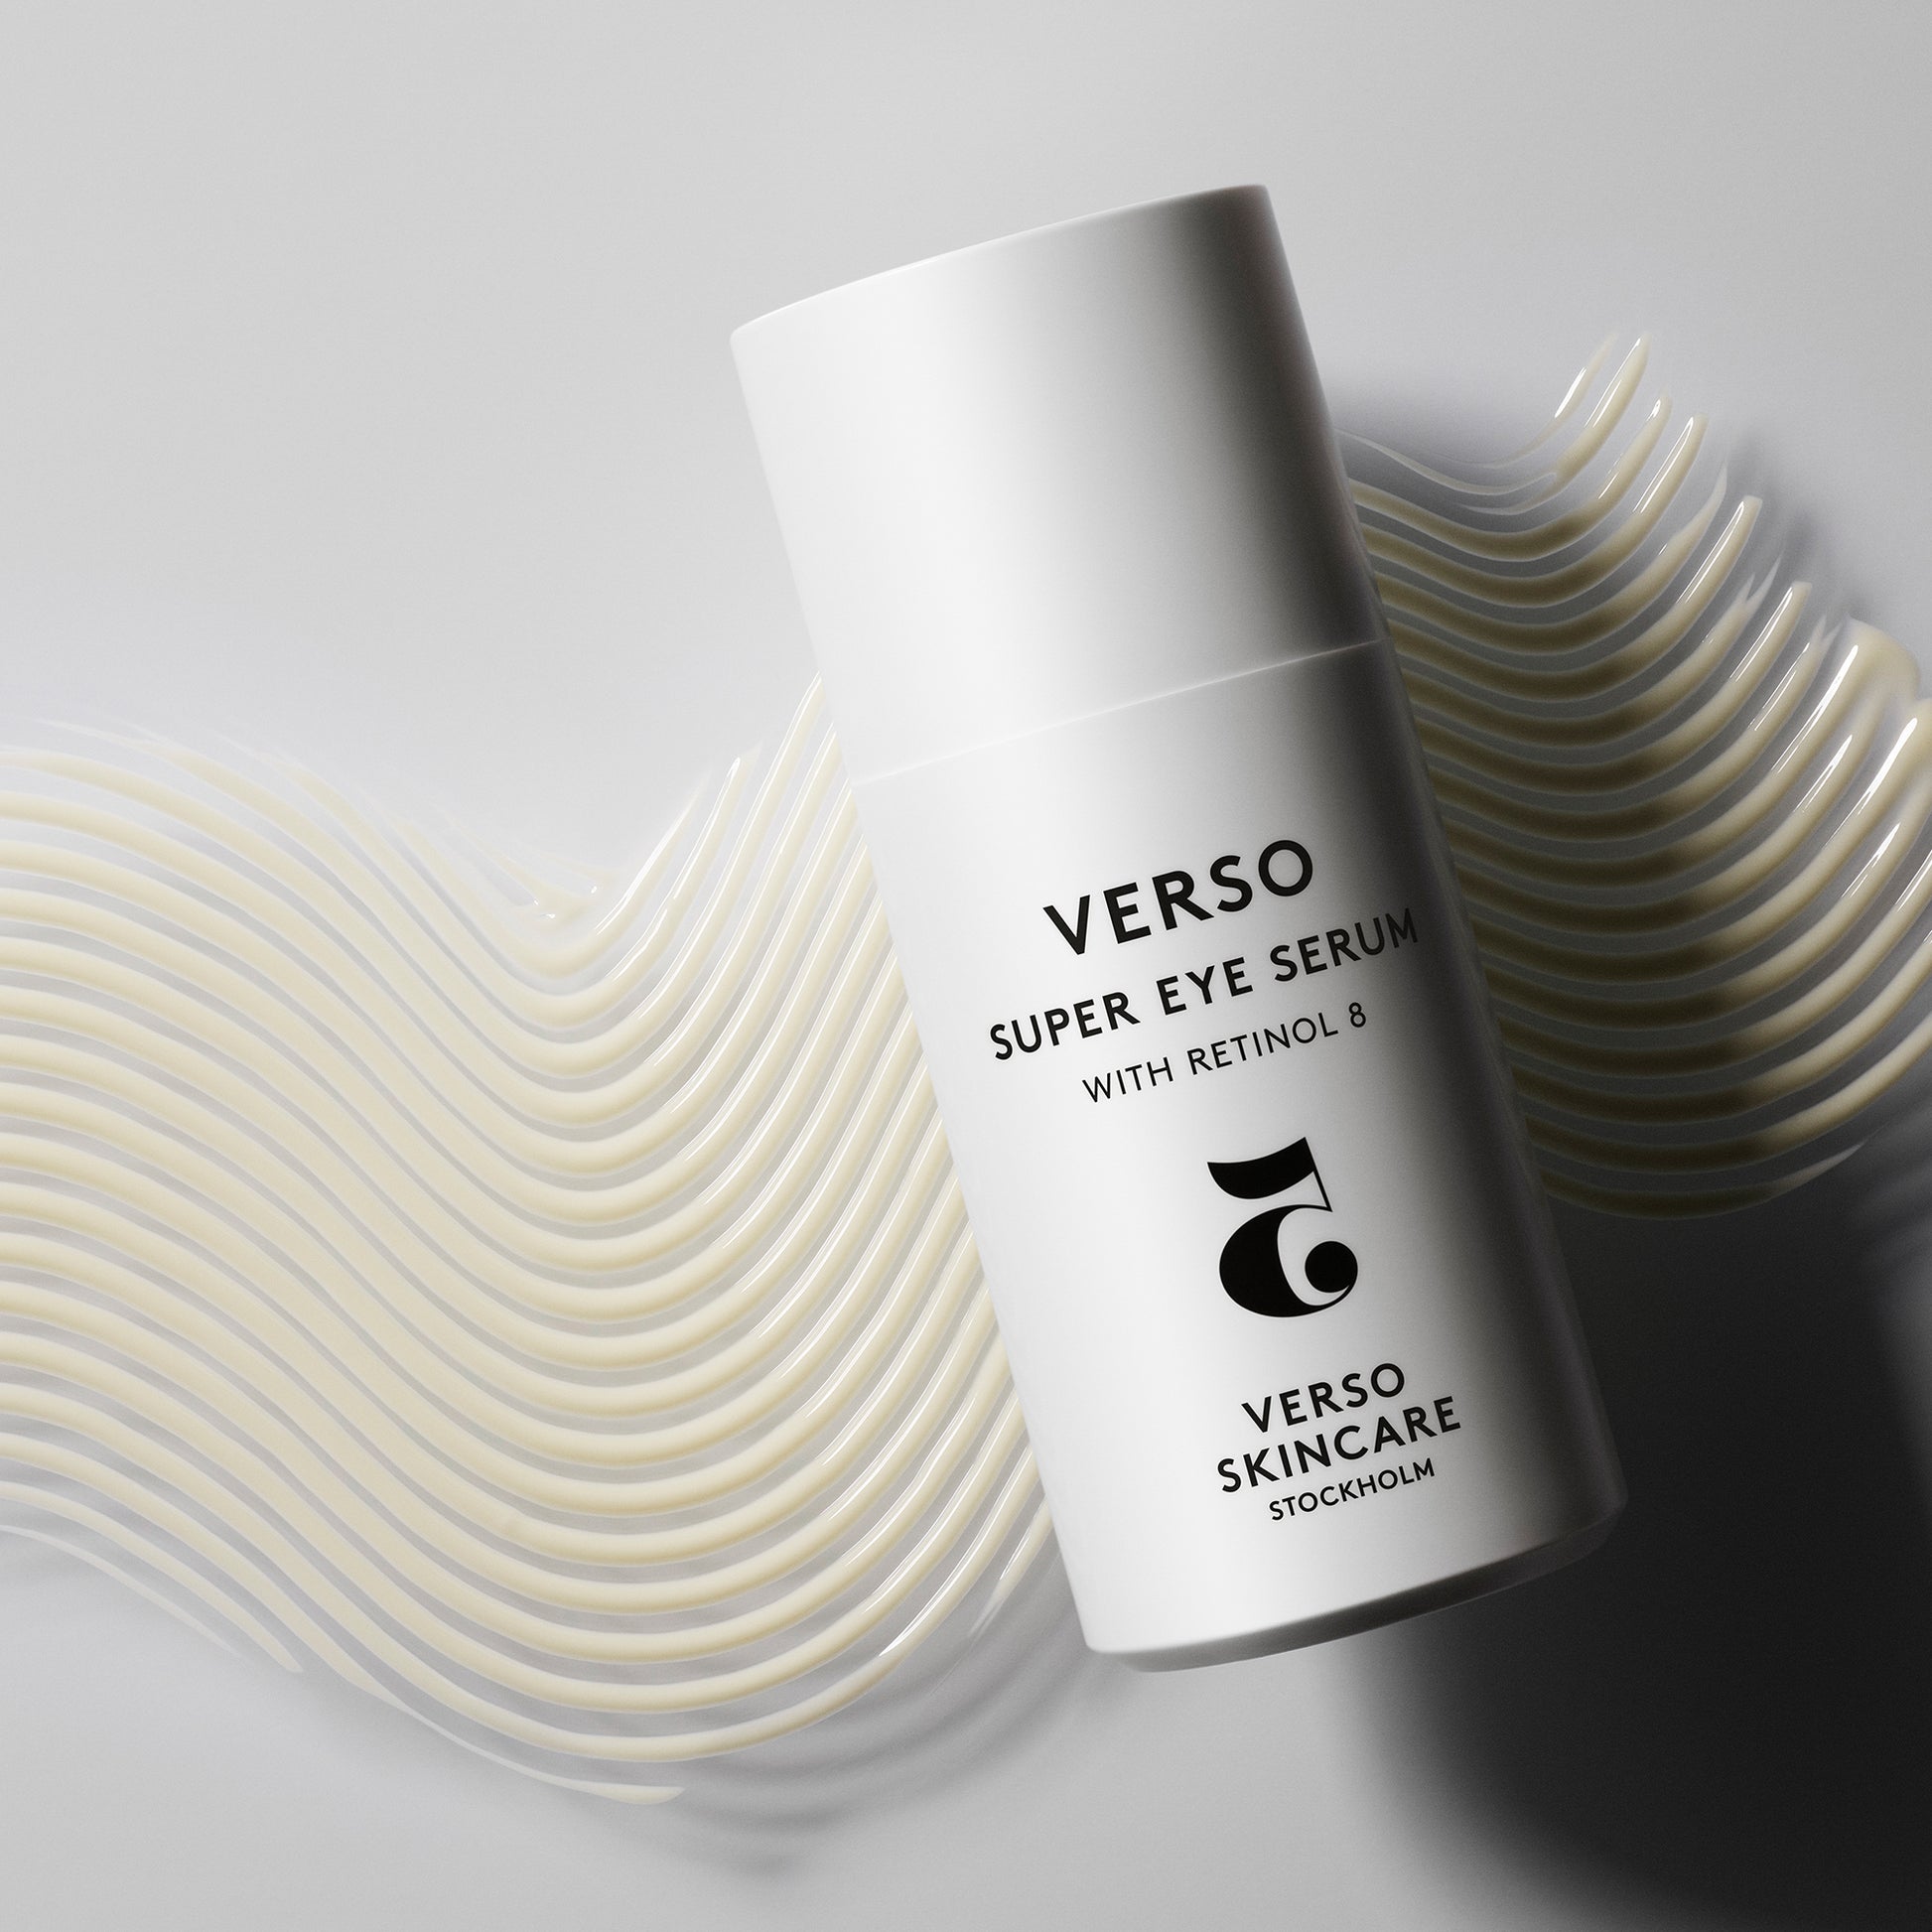 Verso Super Eye Serum: Verso Super Eye Serum is a lightweight eye serum targeting the signs of aging while energizing tired skin around the eyes. Formulated with Retinol 8 for increased affectivity. The results may include a reduced appearance of puffiness, dark circles, and hyperpigmentation.